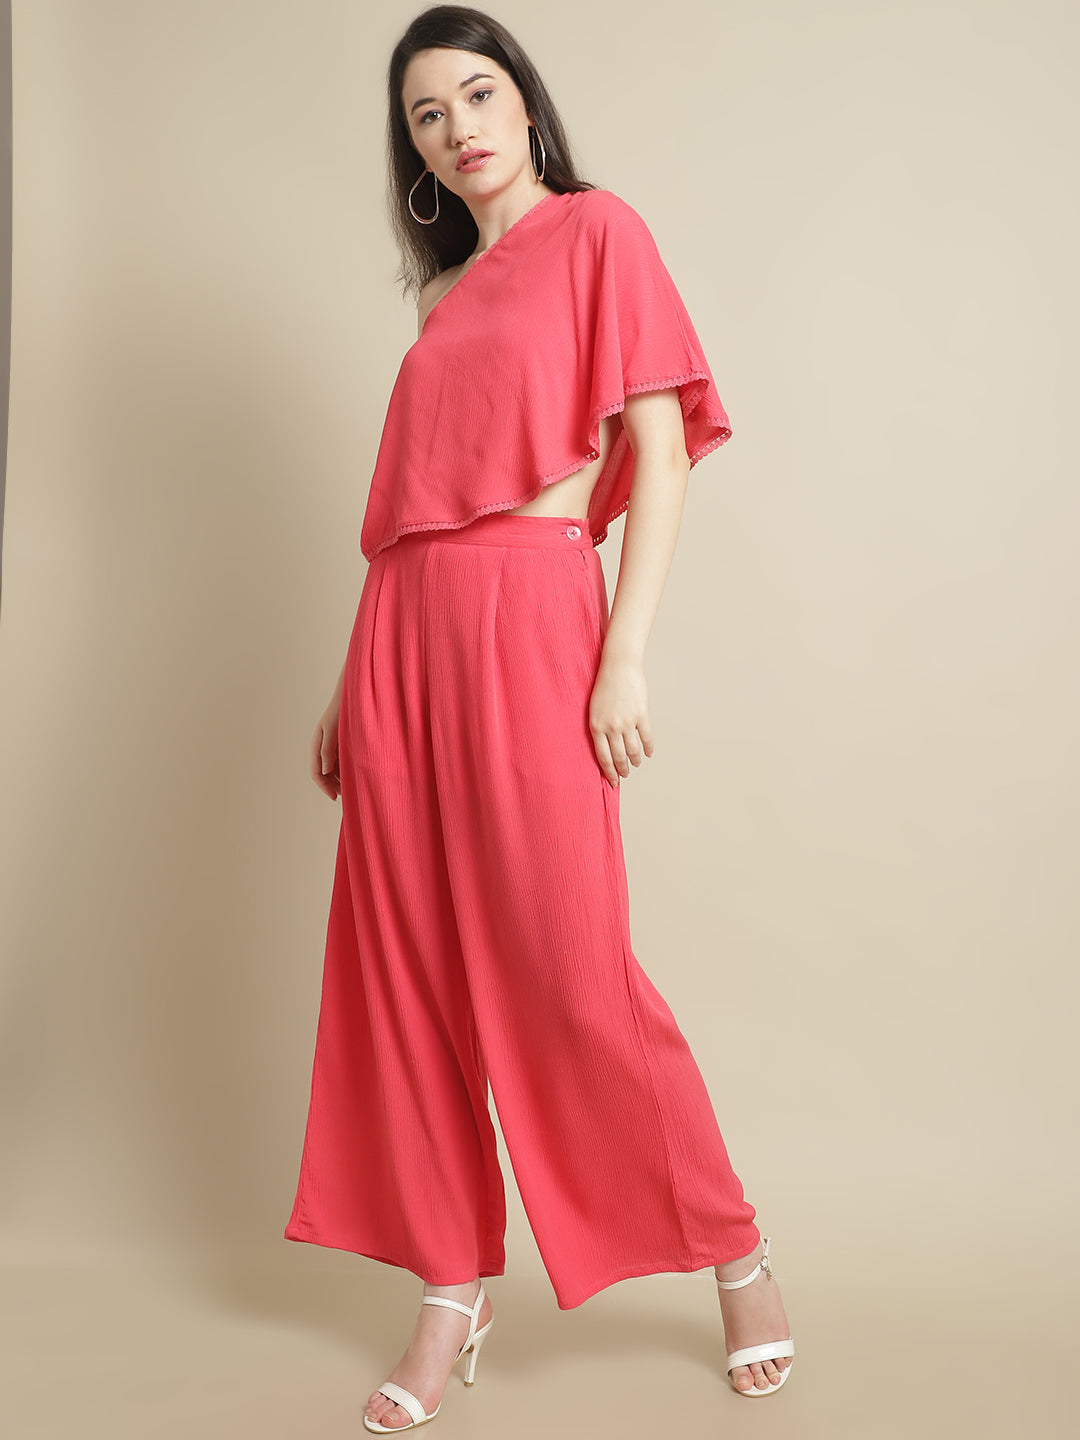 Blanc9 Pink Shoulder Drop Top With Trouser-B9ST121